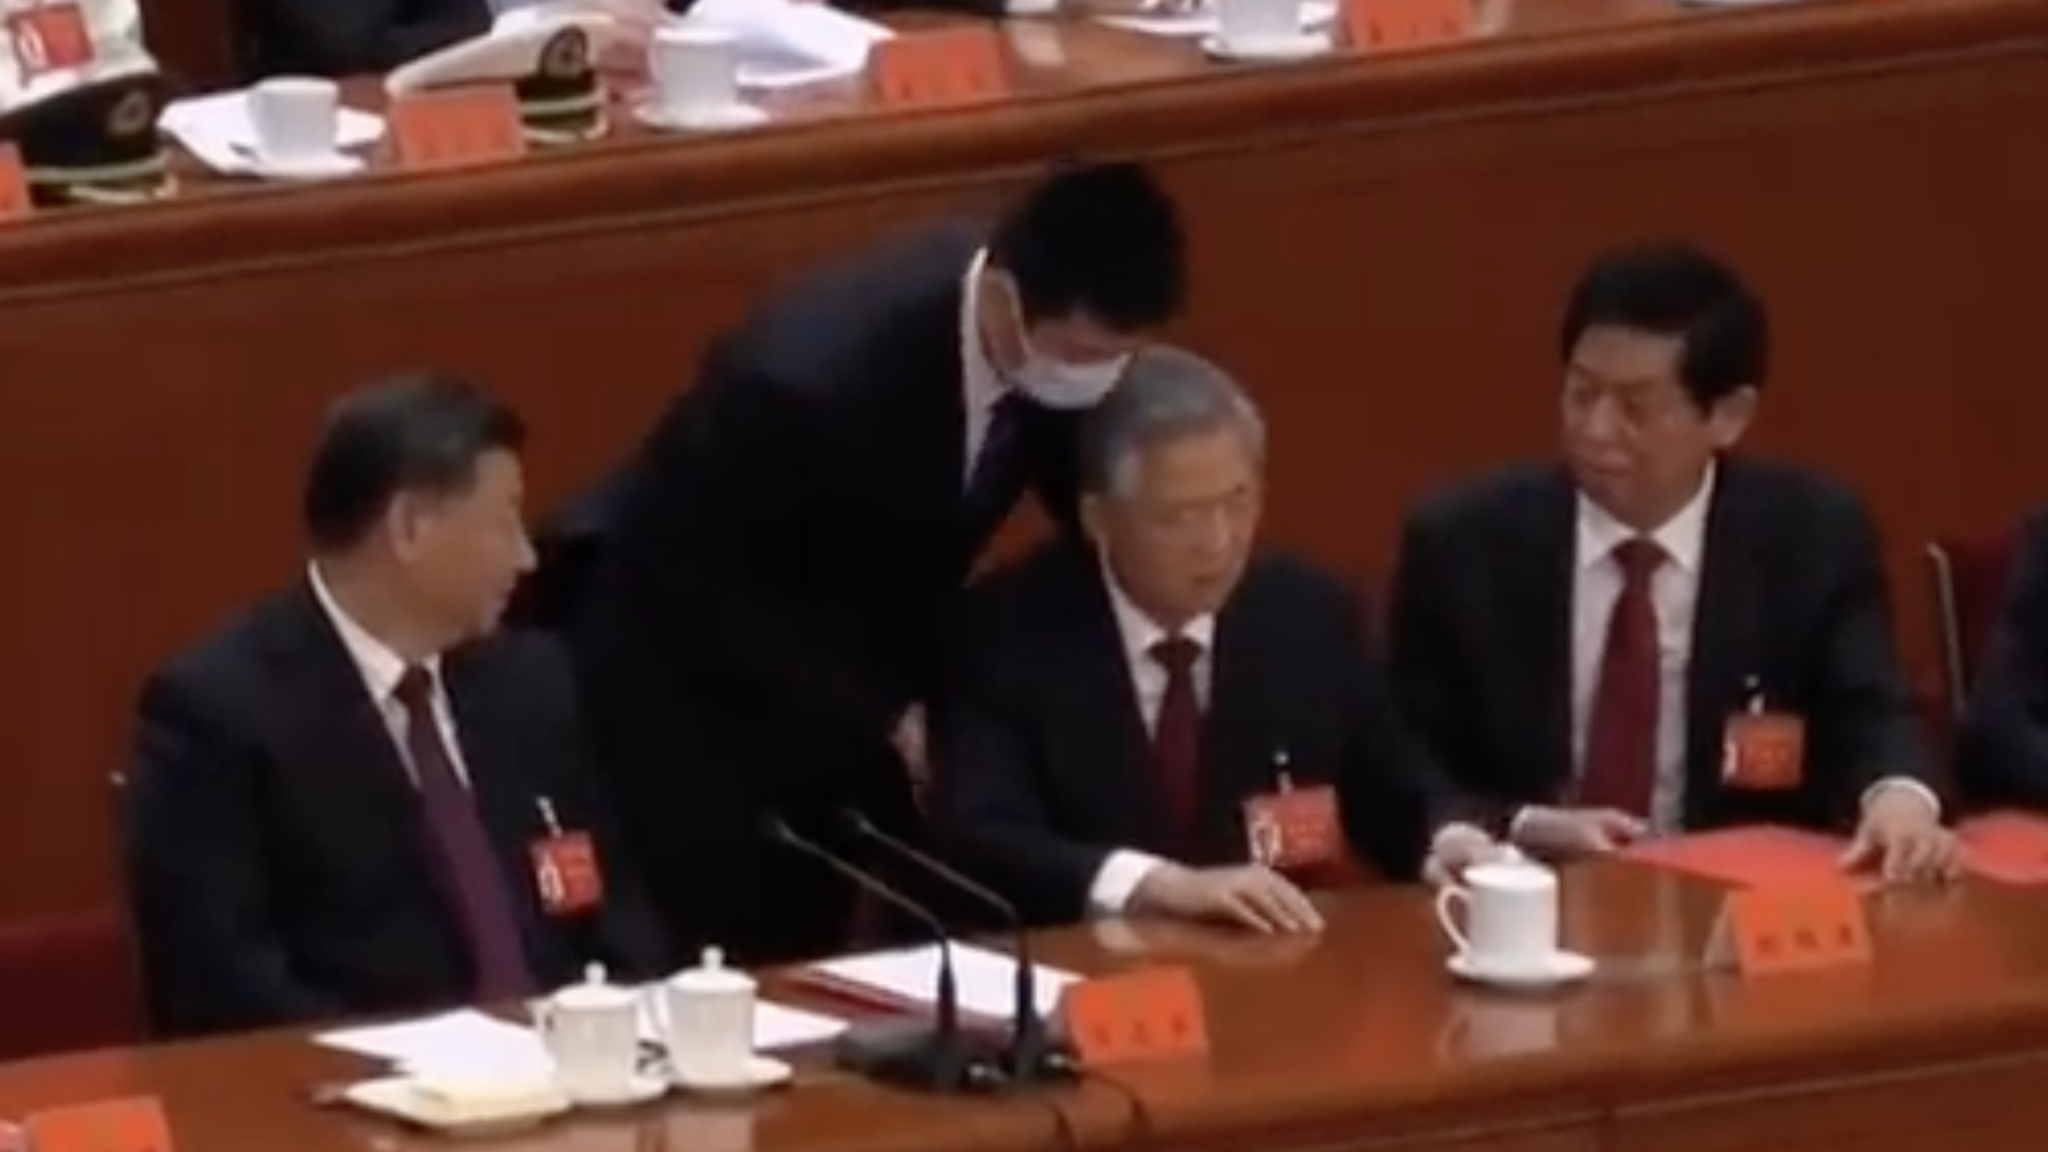 Hu Jintao, who preceded Xi as president of China from 2003-2013, looked confused and even angry as he was unexpectedly hauled away from the closing ceremony the ruling Communist Party congress. The 79-year-old former leader touched Xi’s shoulder and the two appeared to exchange words, but the current president seemed unmoved.